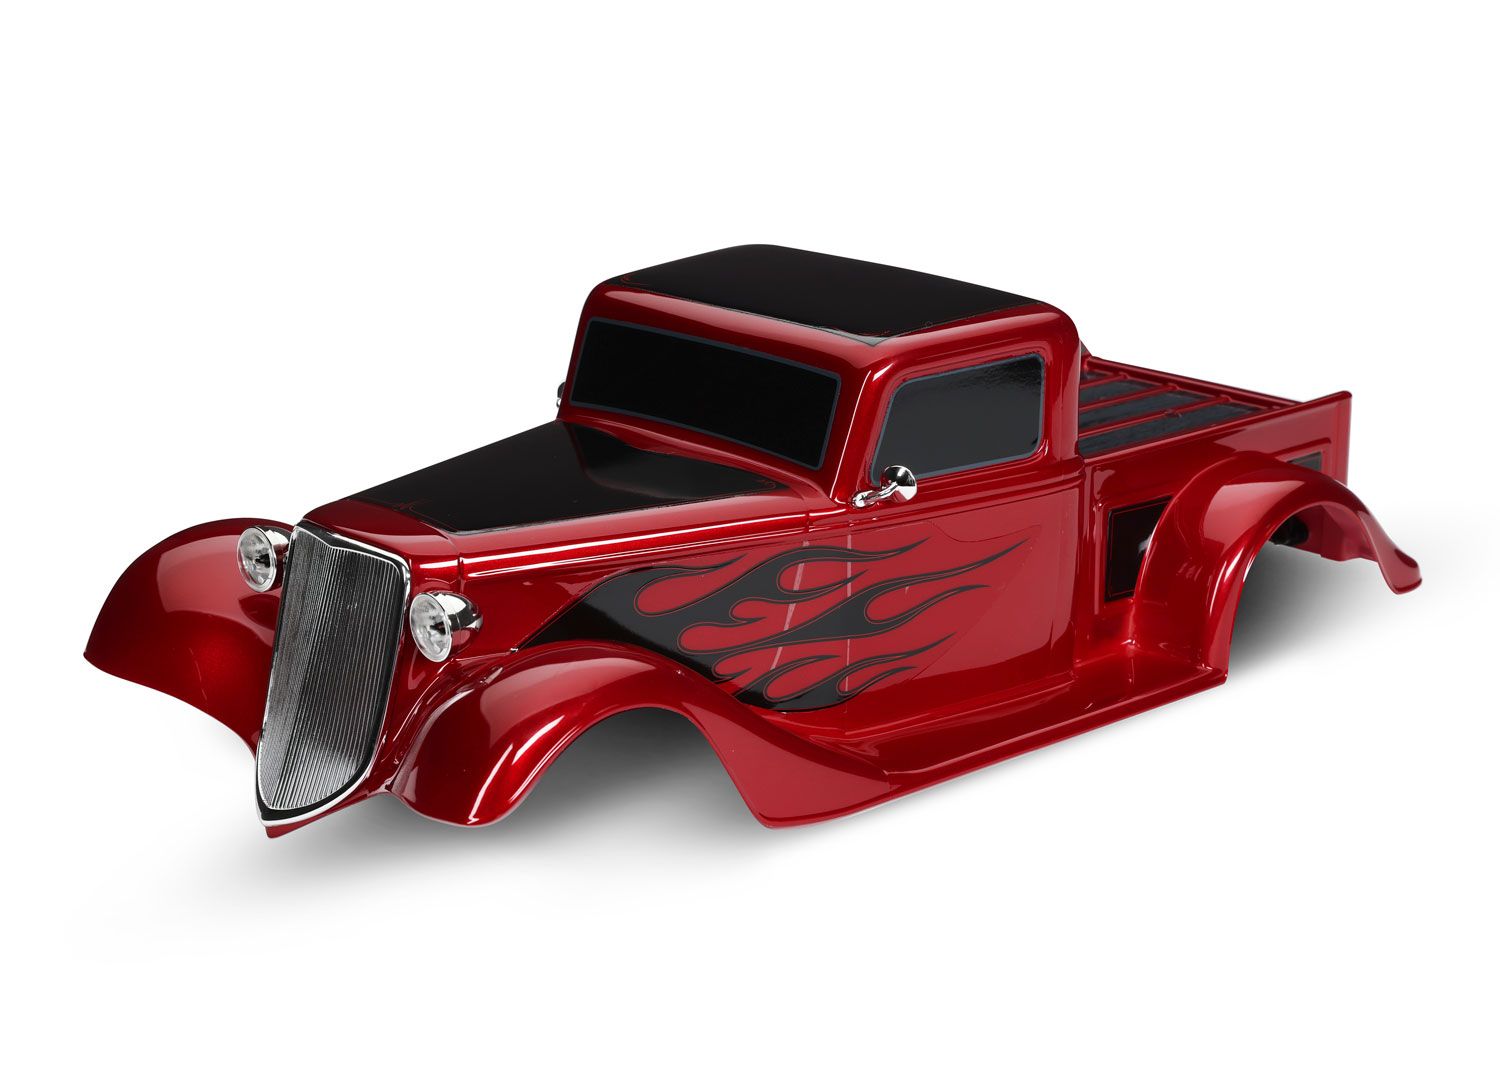 TRAXXAS 9335R Body, Factory Five '35 Hot Rod Truck, complete (red) (painted, decals applied) (includes front grille, side mirrors, headlights, tail lights, foam pads)